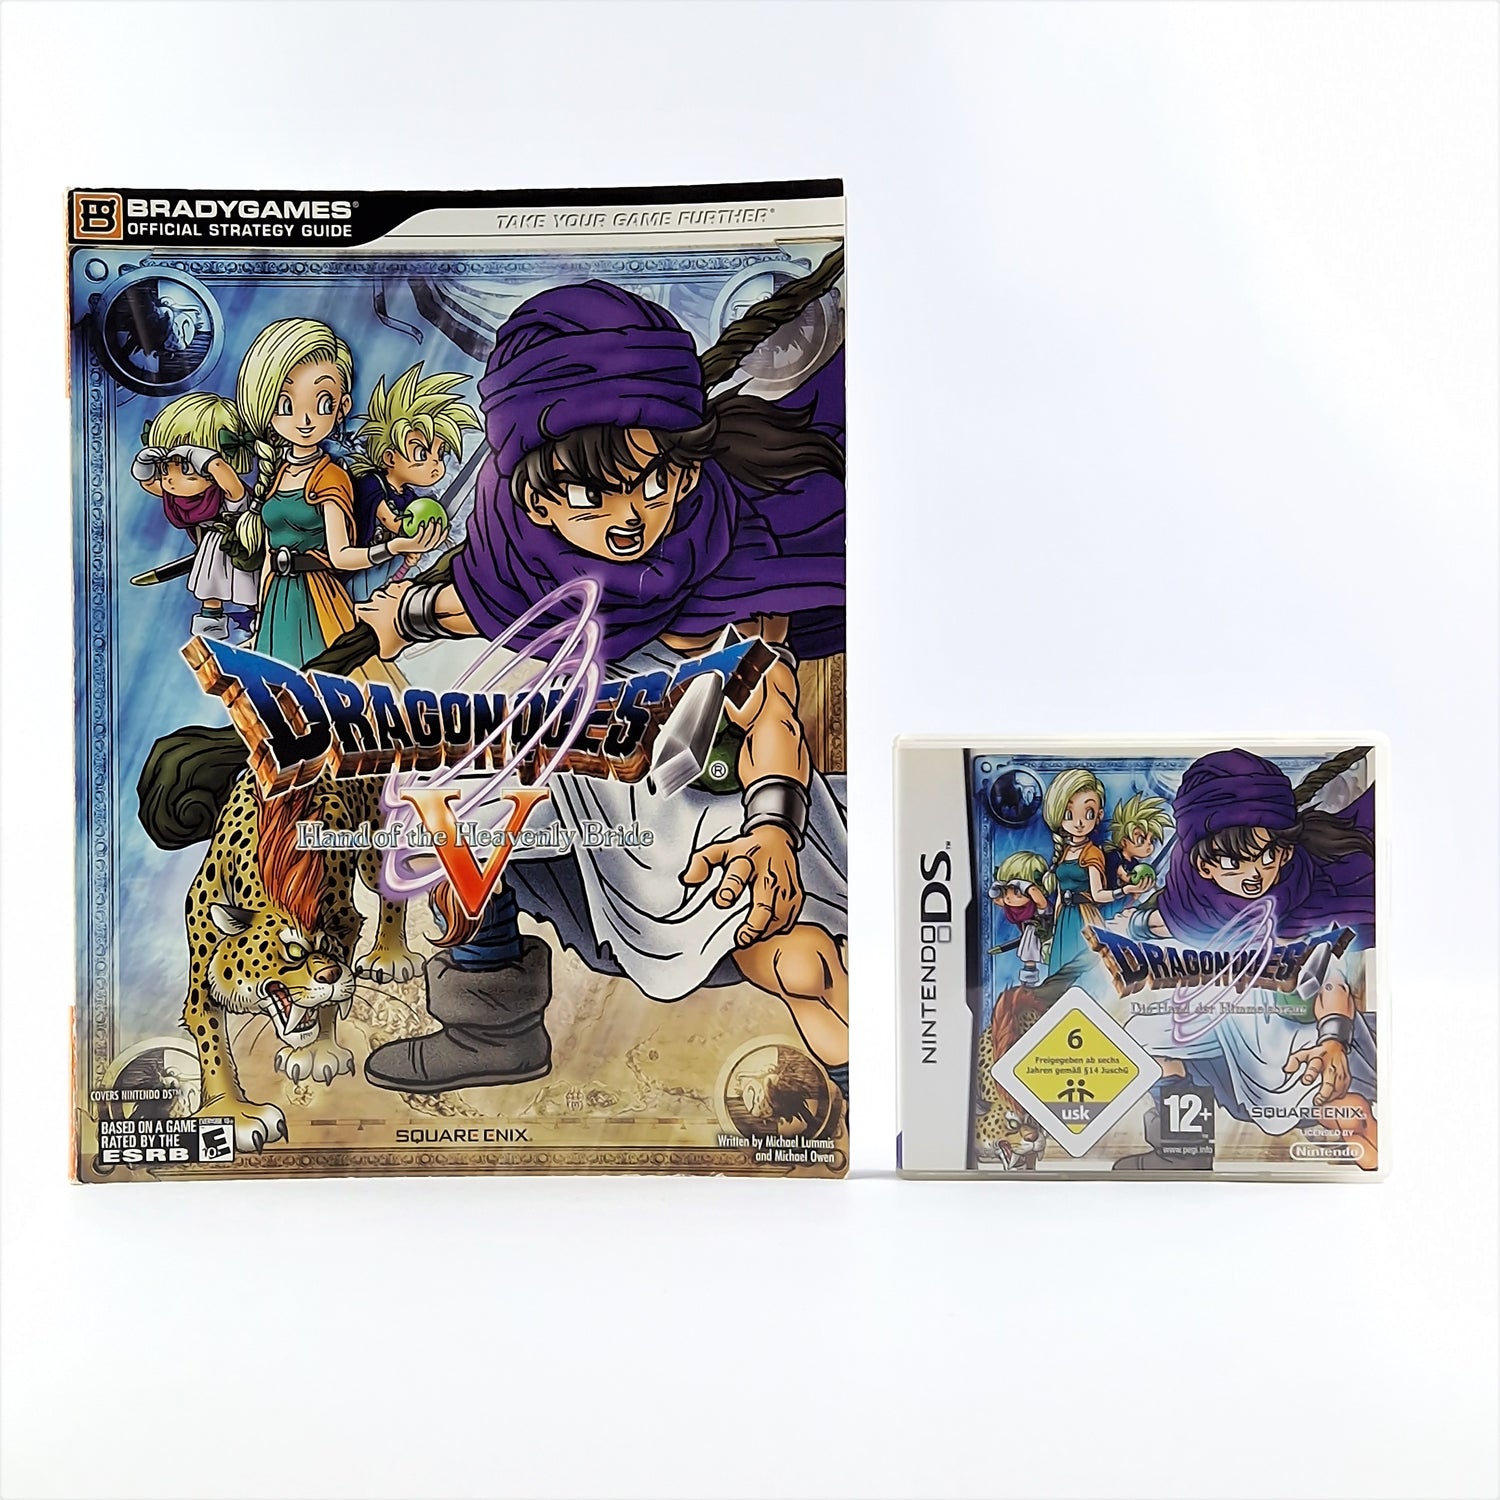 Nintendo DS Game: Dragon Quest The Hand of the Celestial Bride + Bradygames Guide